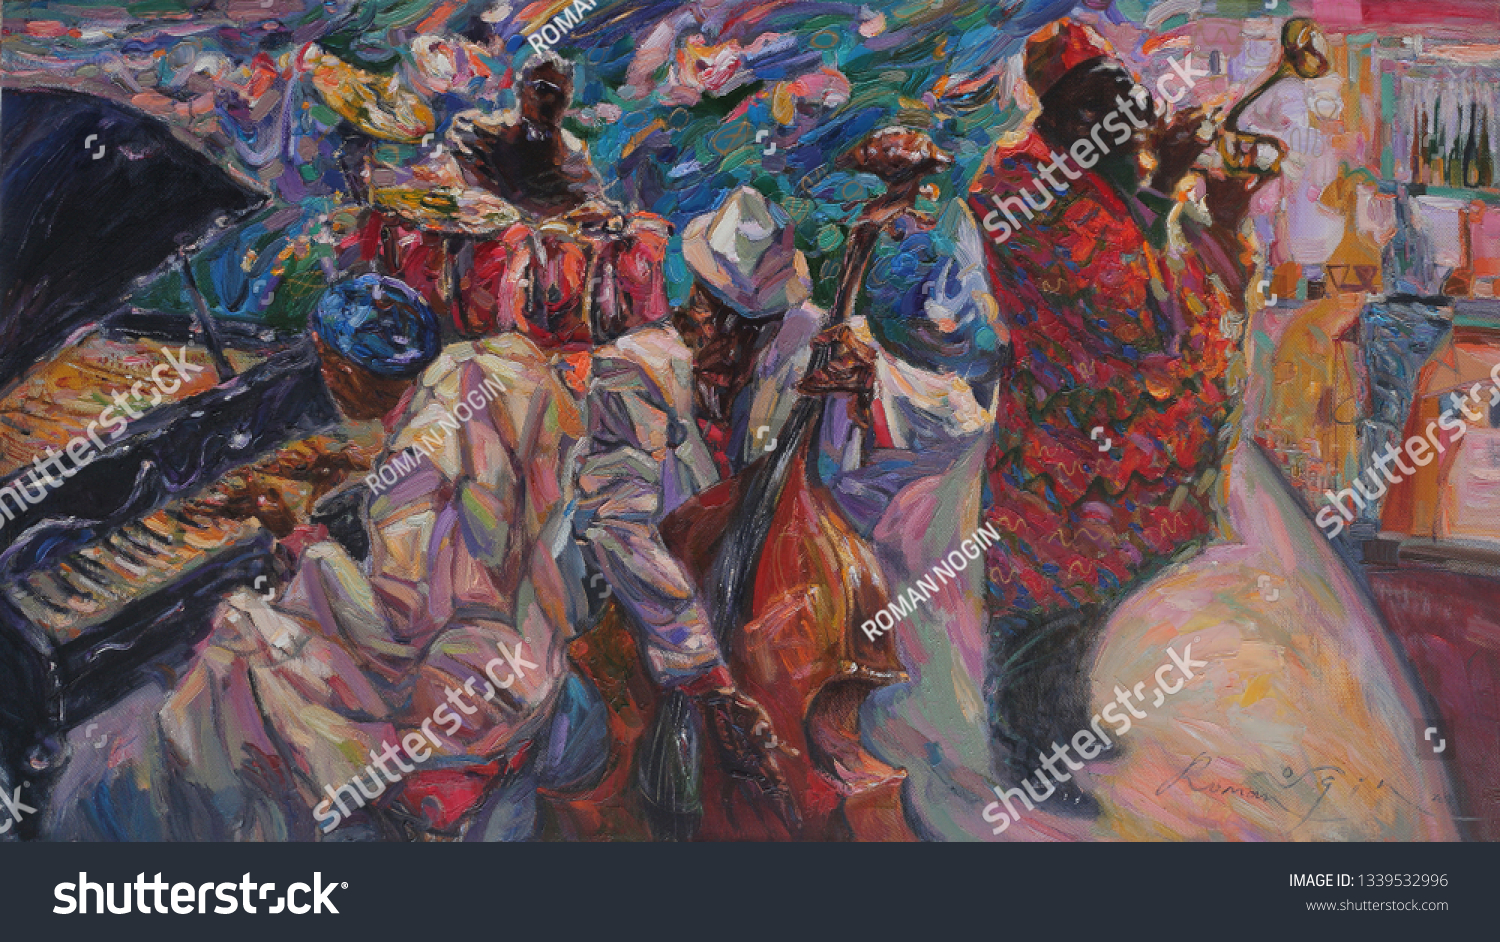 jazz band, oil painting, artist Roman Nogin, series "Sounds of Jazz."  #1339532996